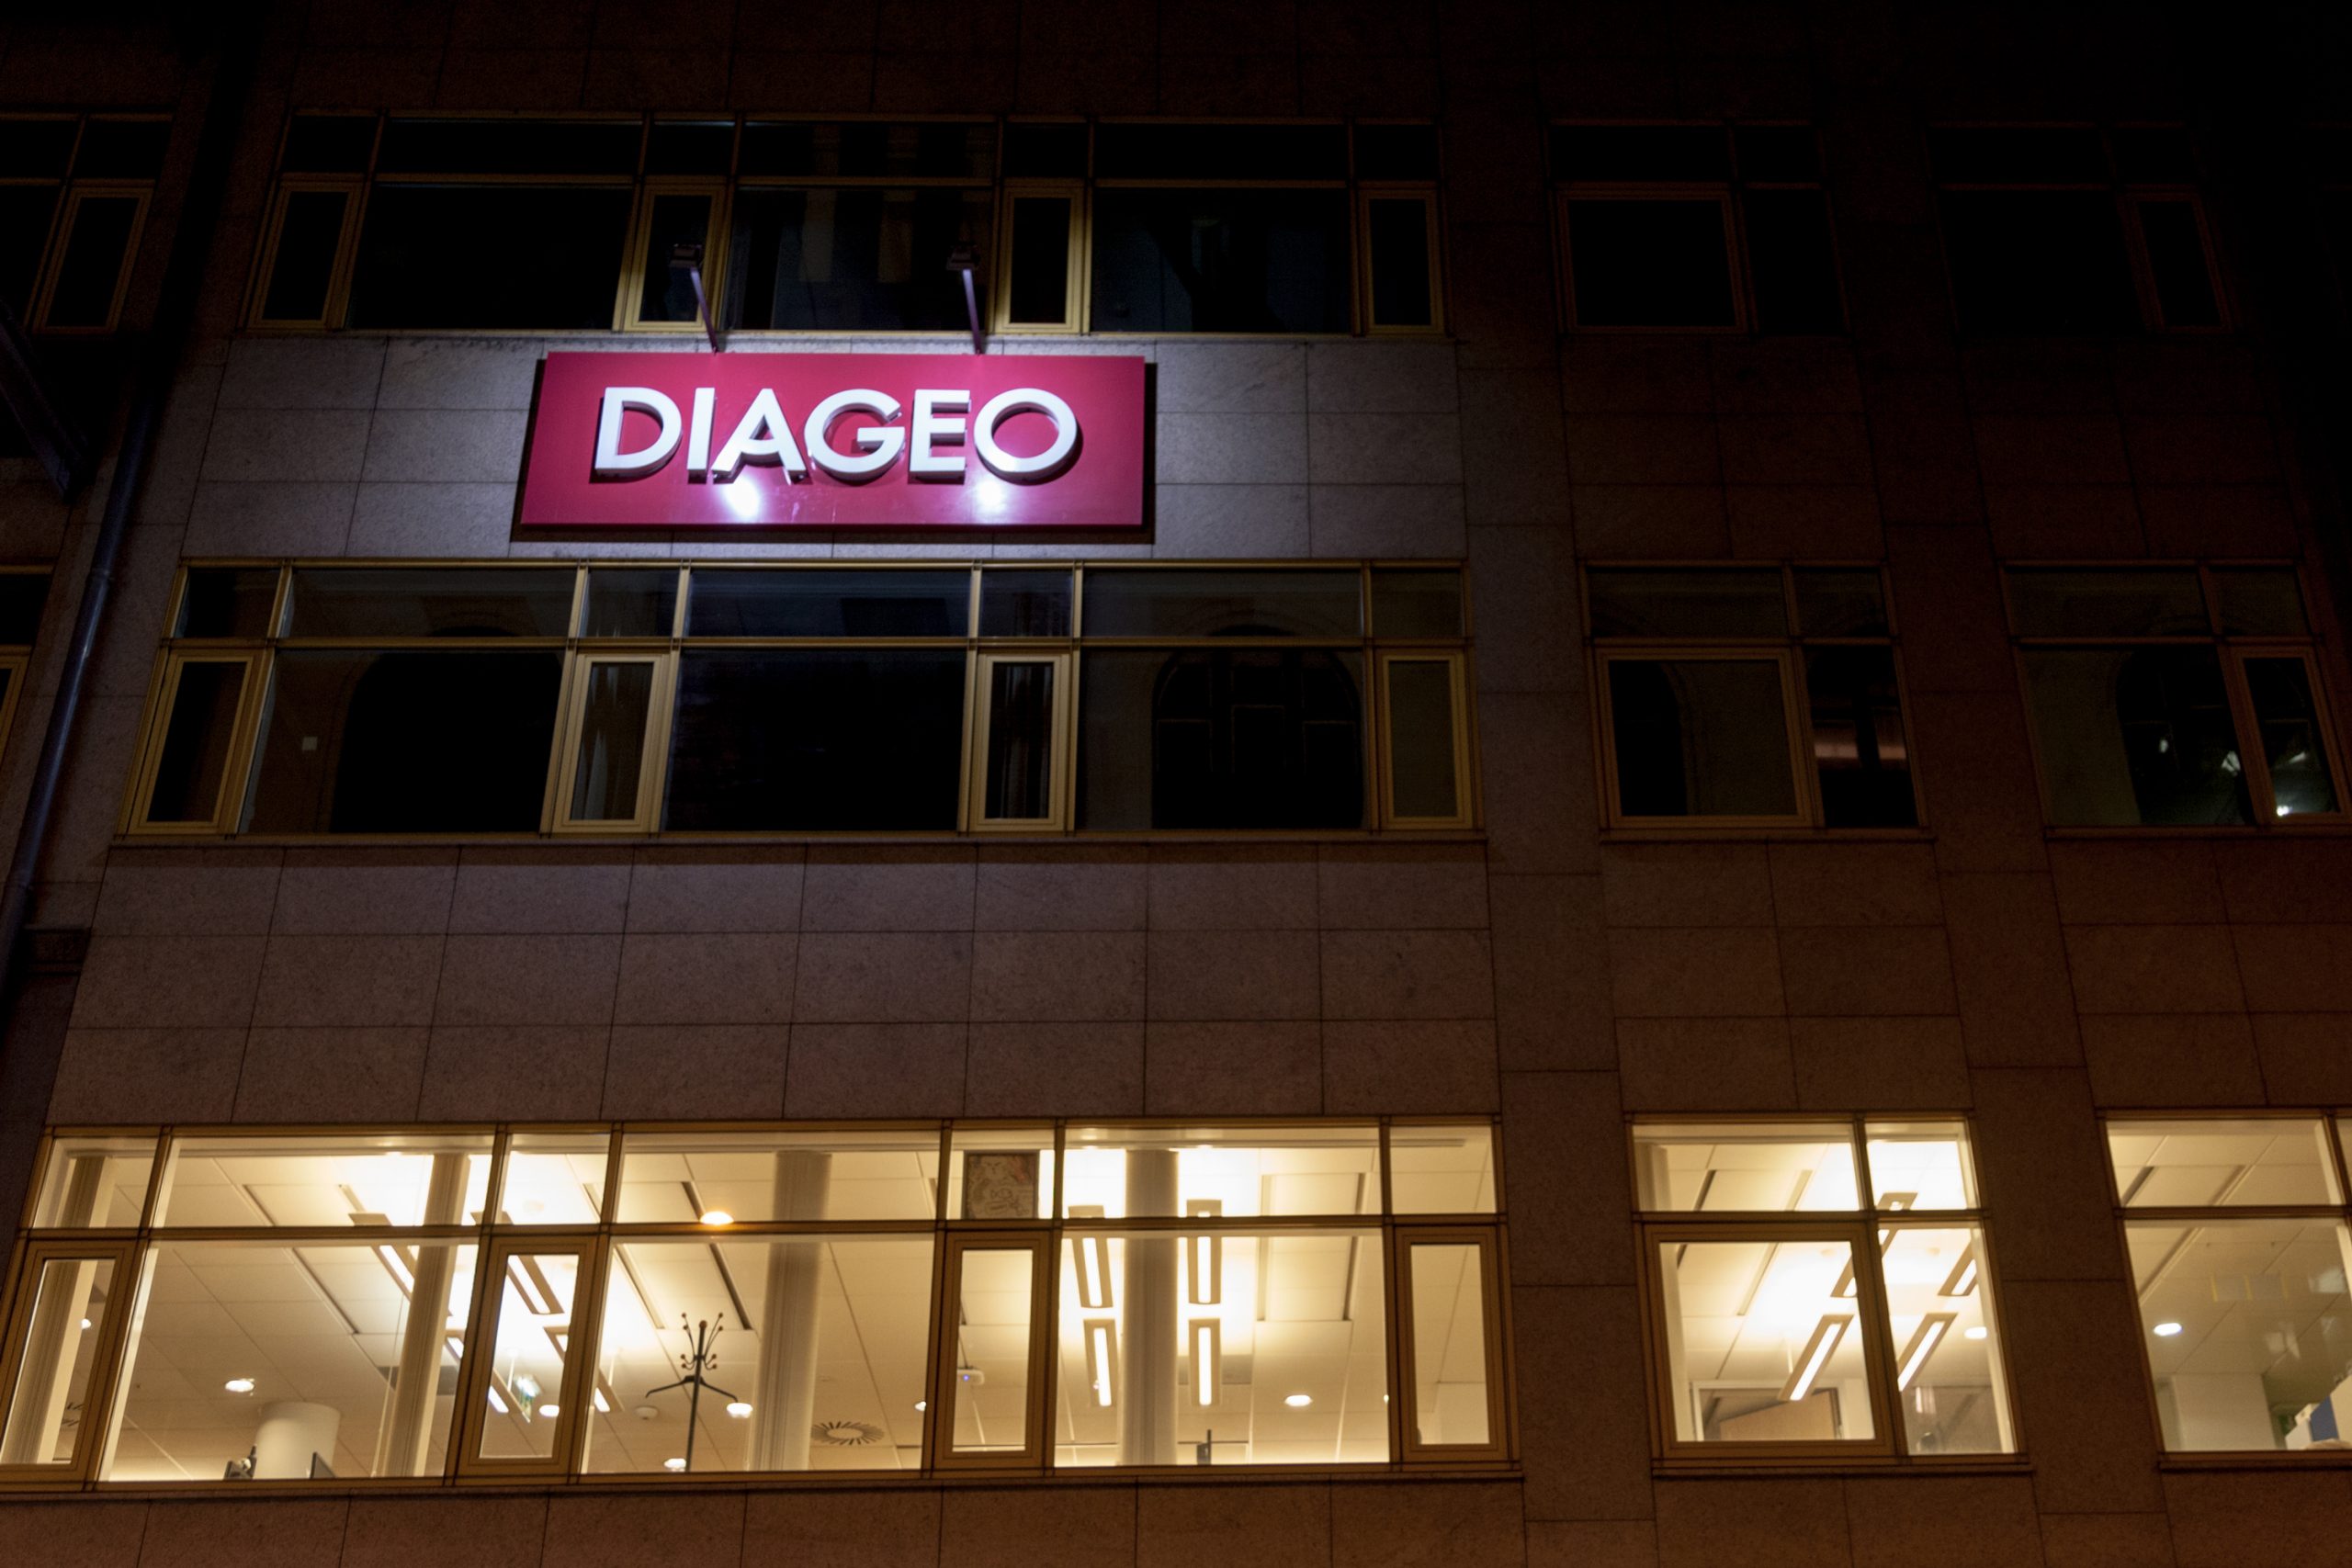 Diageo fined £1.2 million for breaching climate regulations